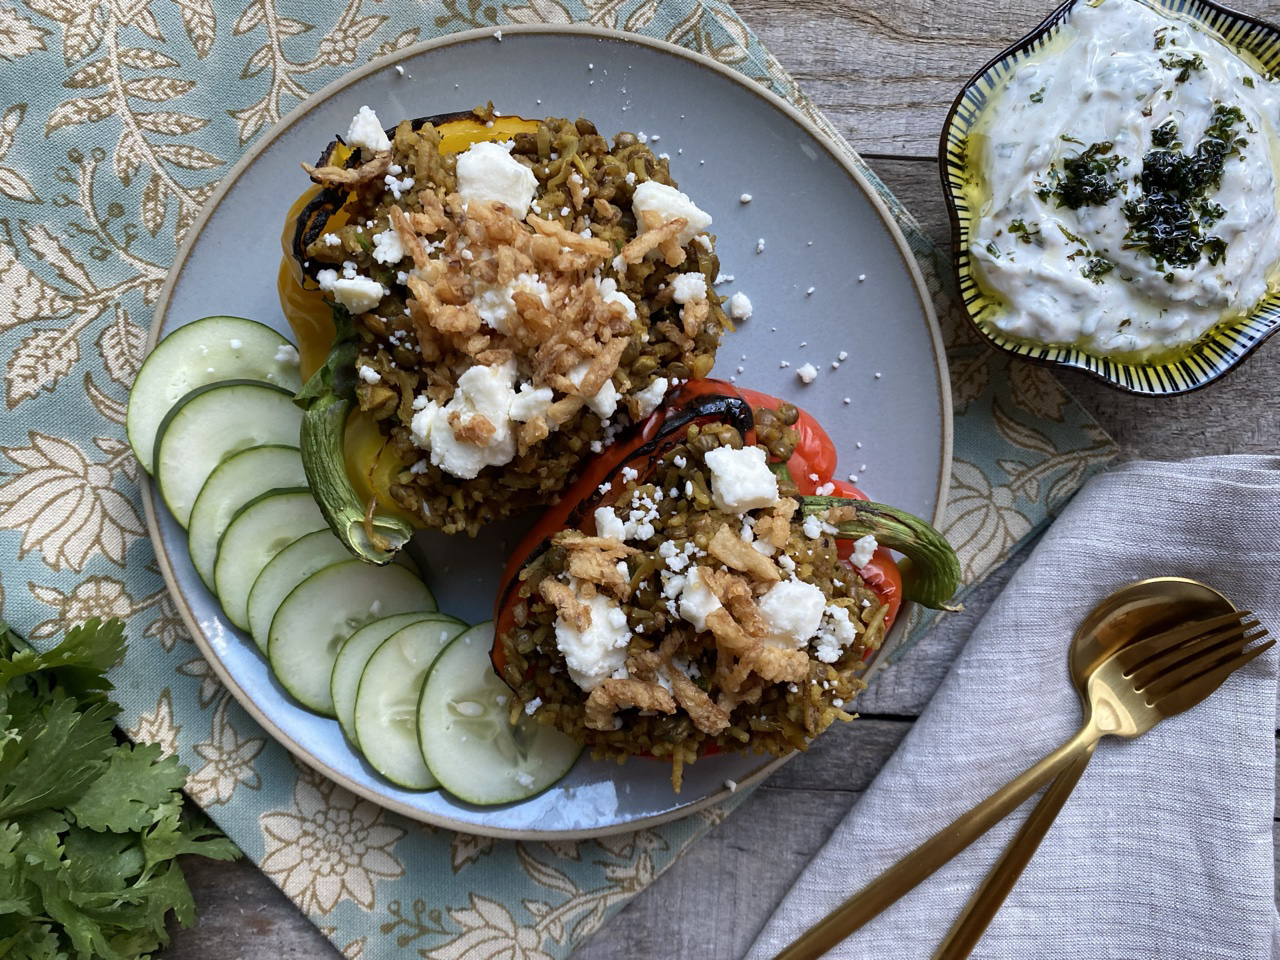 D7DA9055 C244 408B A67C E9A0C942C5C8 - Lebanese Mujadara Stuffed Peppers with Herbed Labneh